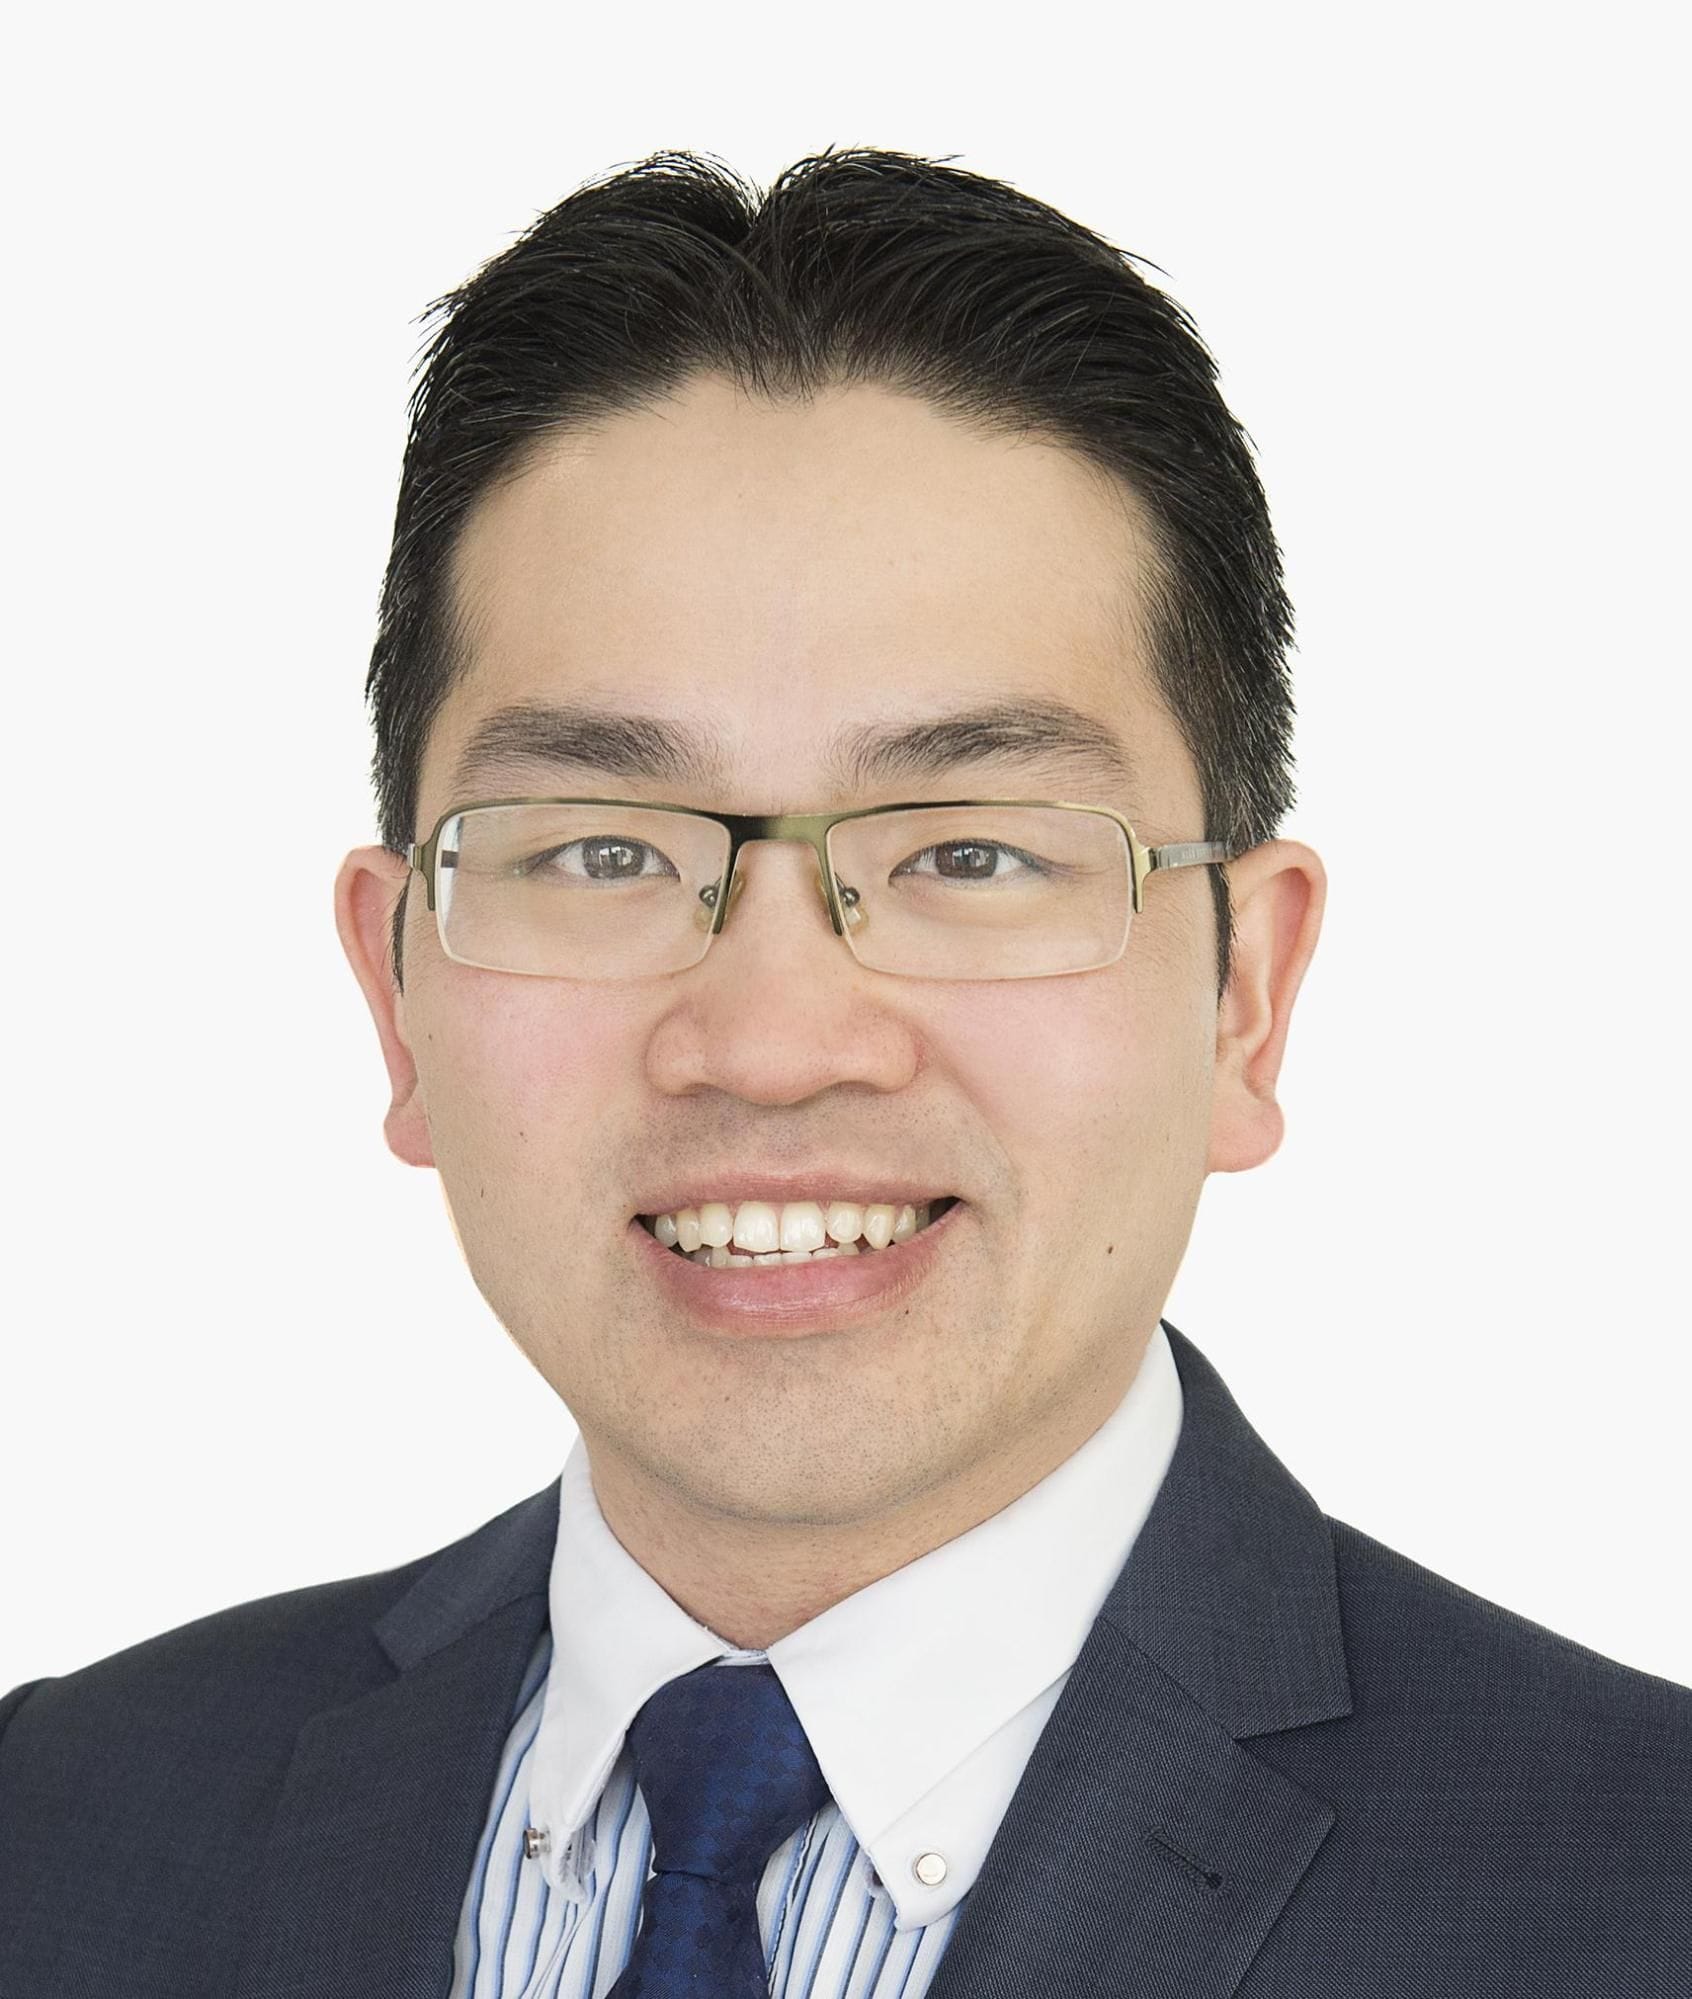 Dr. Nicholas Chin, consultant respiratory and general medicine physician at Maroondah Specialist Group